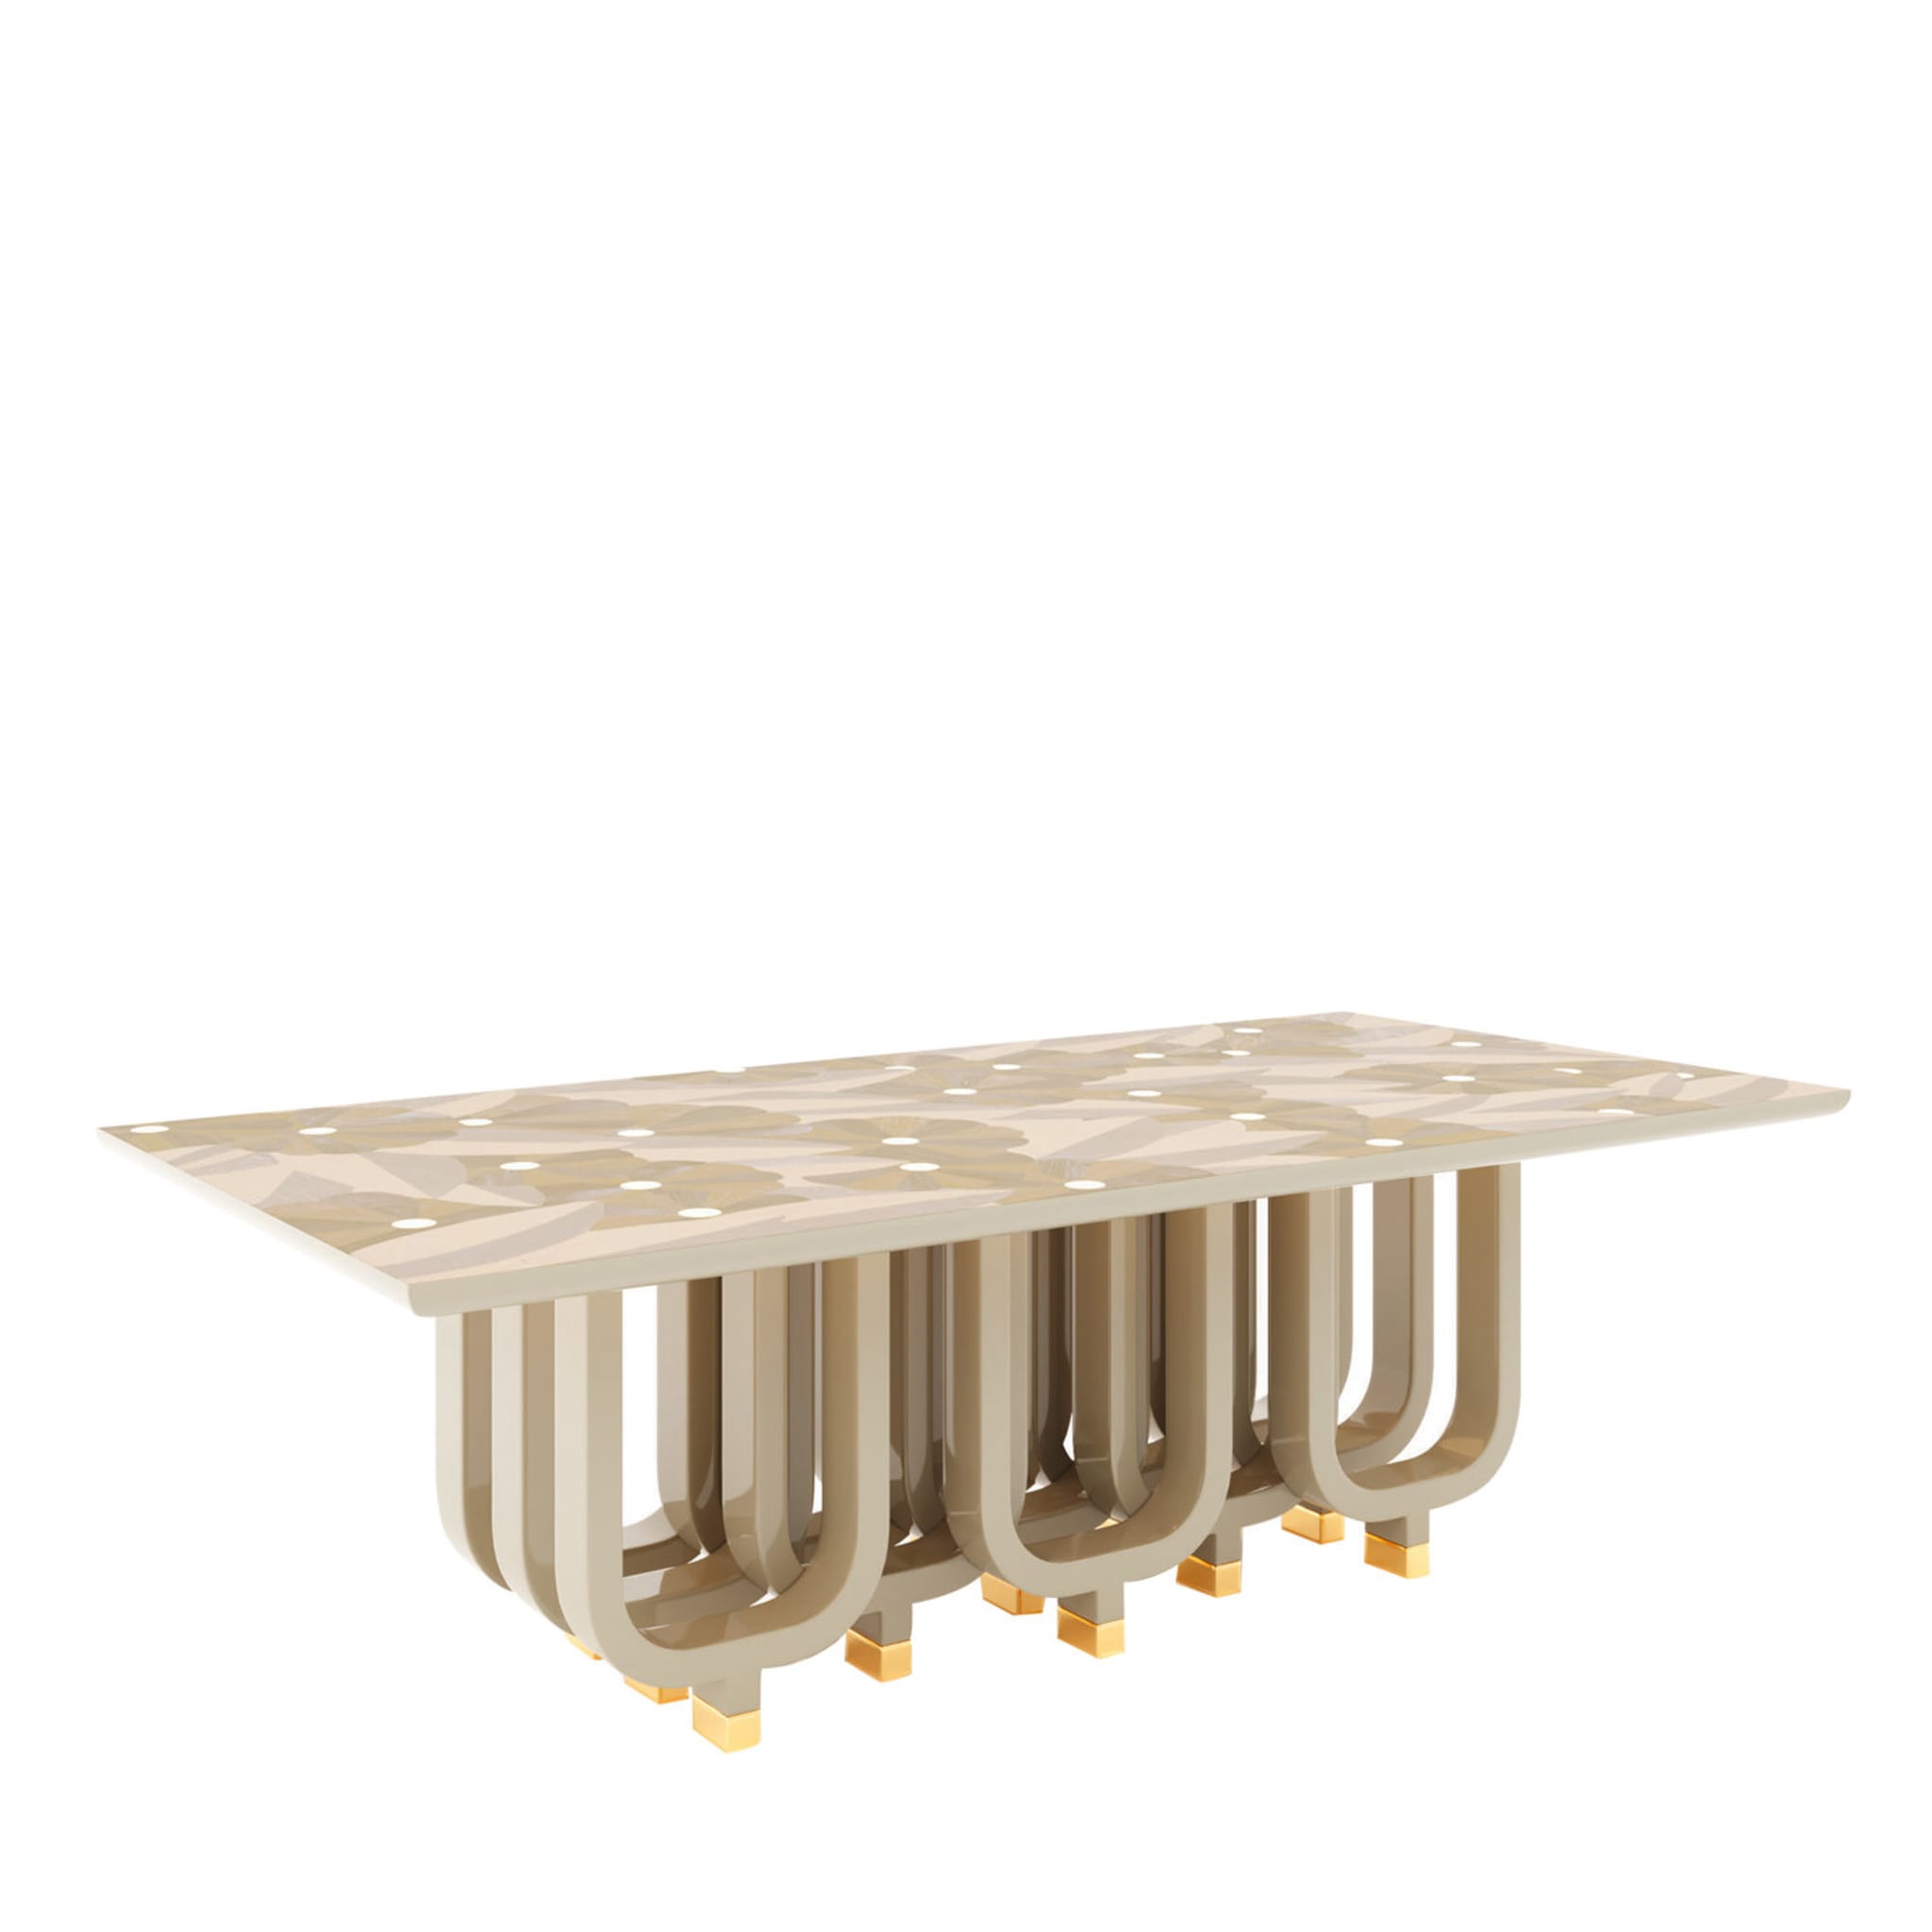 Watermill Dining Table by Giannella Ventura - Main view